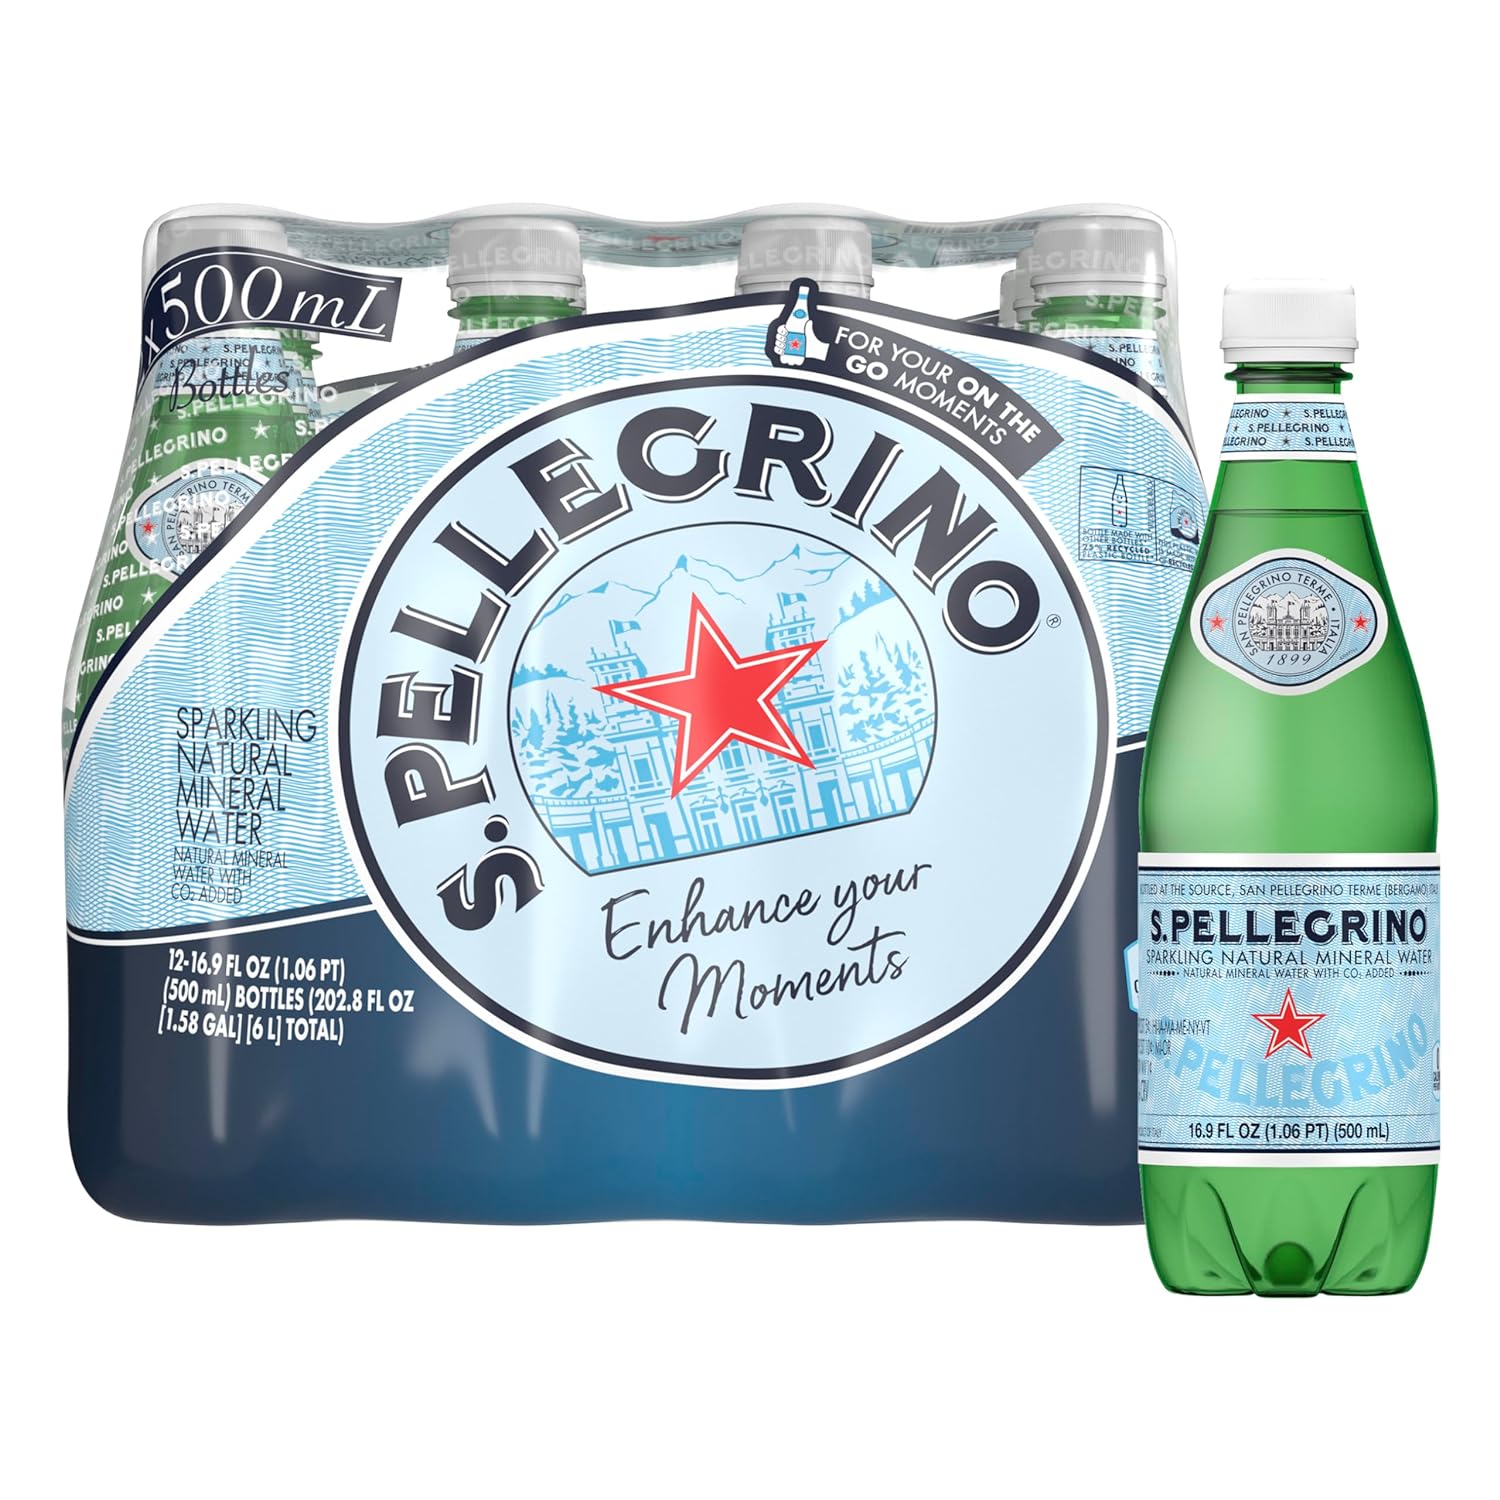 12-Pack 16.9-Oz S.Pellegrino Sparkling Natural Mineral Water 5 for $39.30 ($7.85 each) w/ S&S + Free Shipping